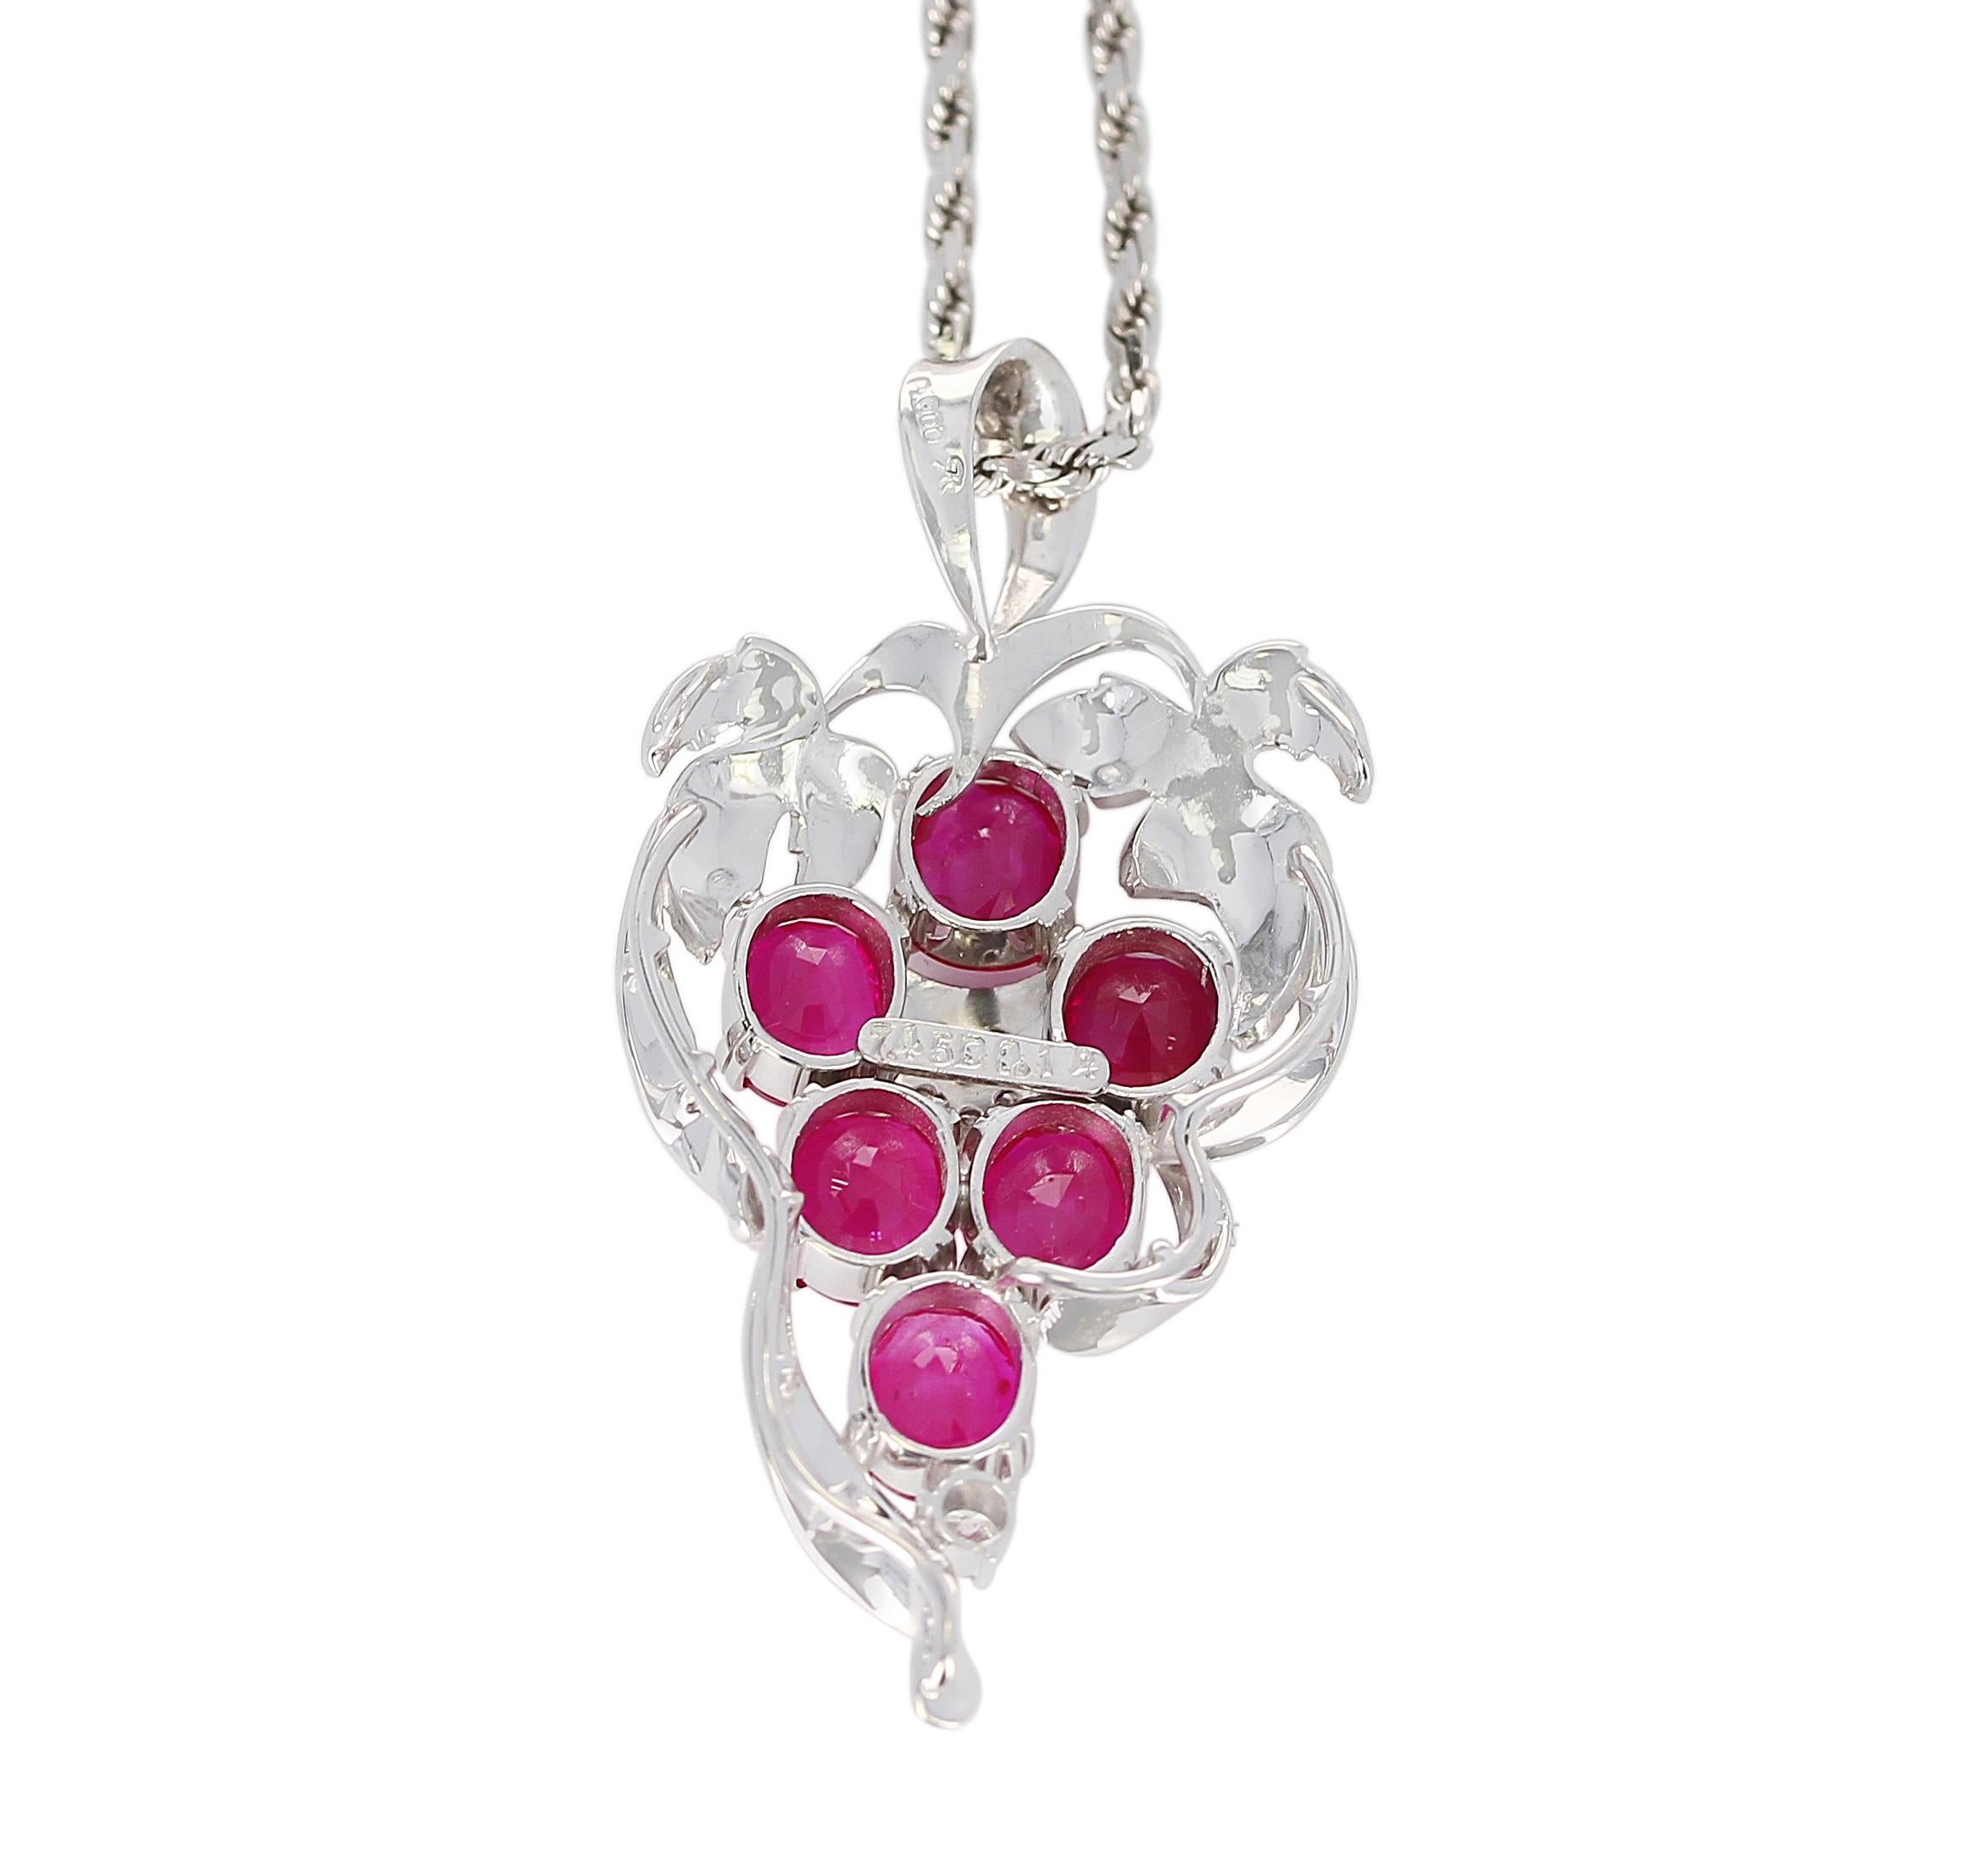 Grape-Style Ruby Pendant with Diamonds in Platinum and 18K White Gold. The six ruby stones weigh 7.45 carats, and the diamonds weigh 0.14 carats. With chain, Total Weight: 22.50 grams.  